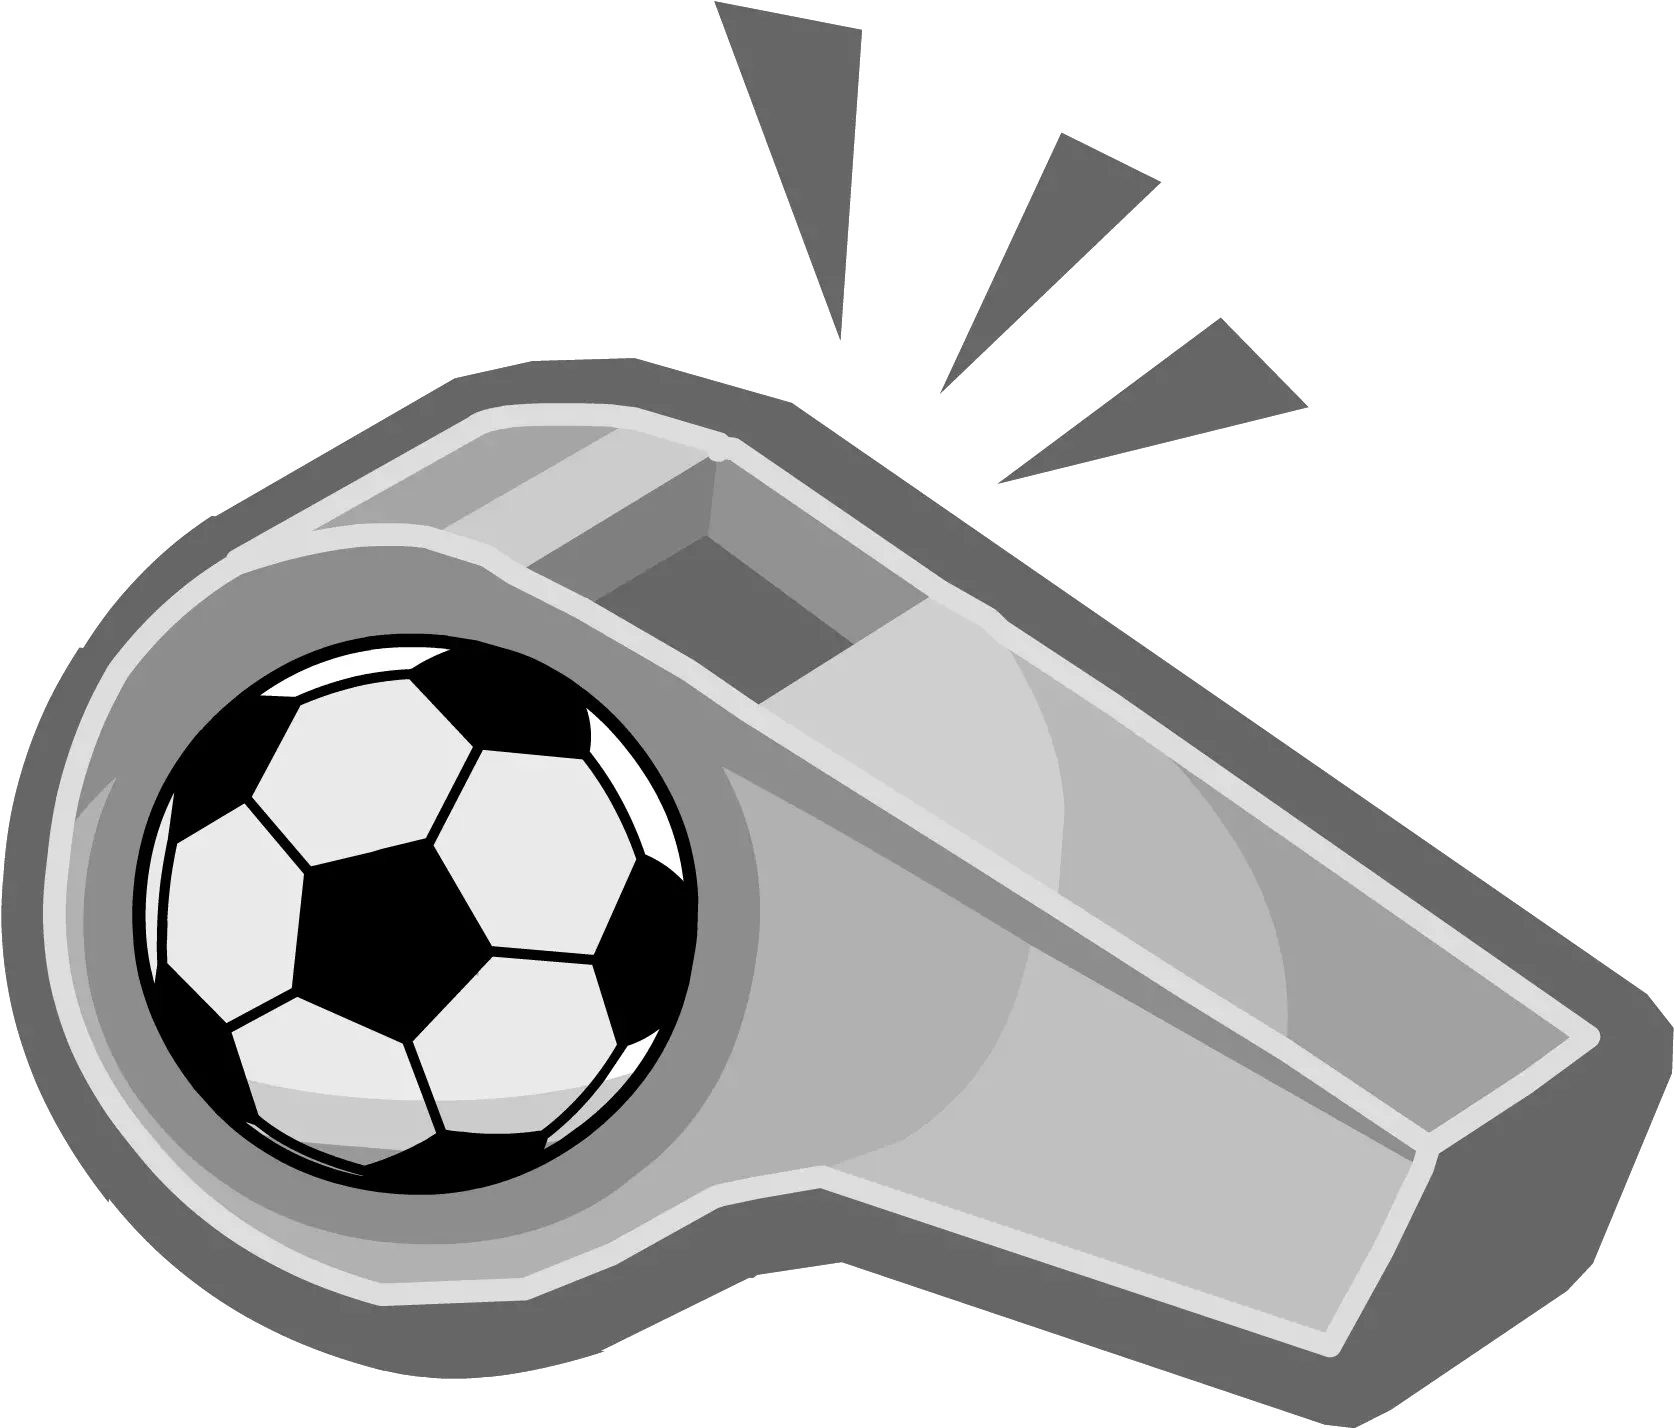 Whistle Png 5 Image Football Whistle Png Whistle Png